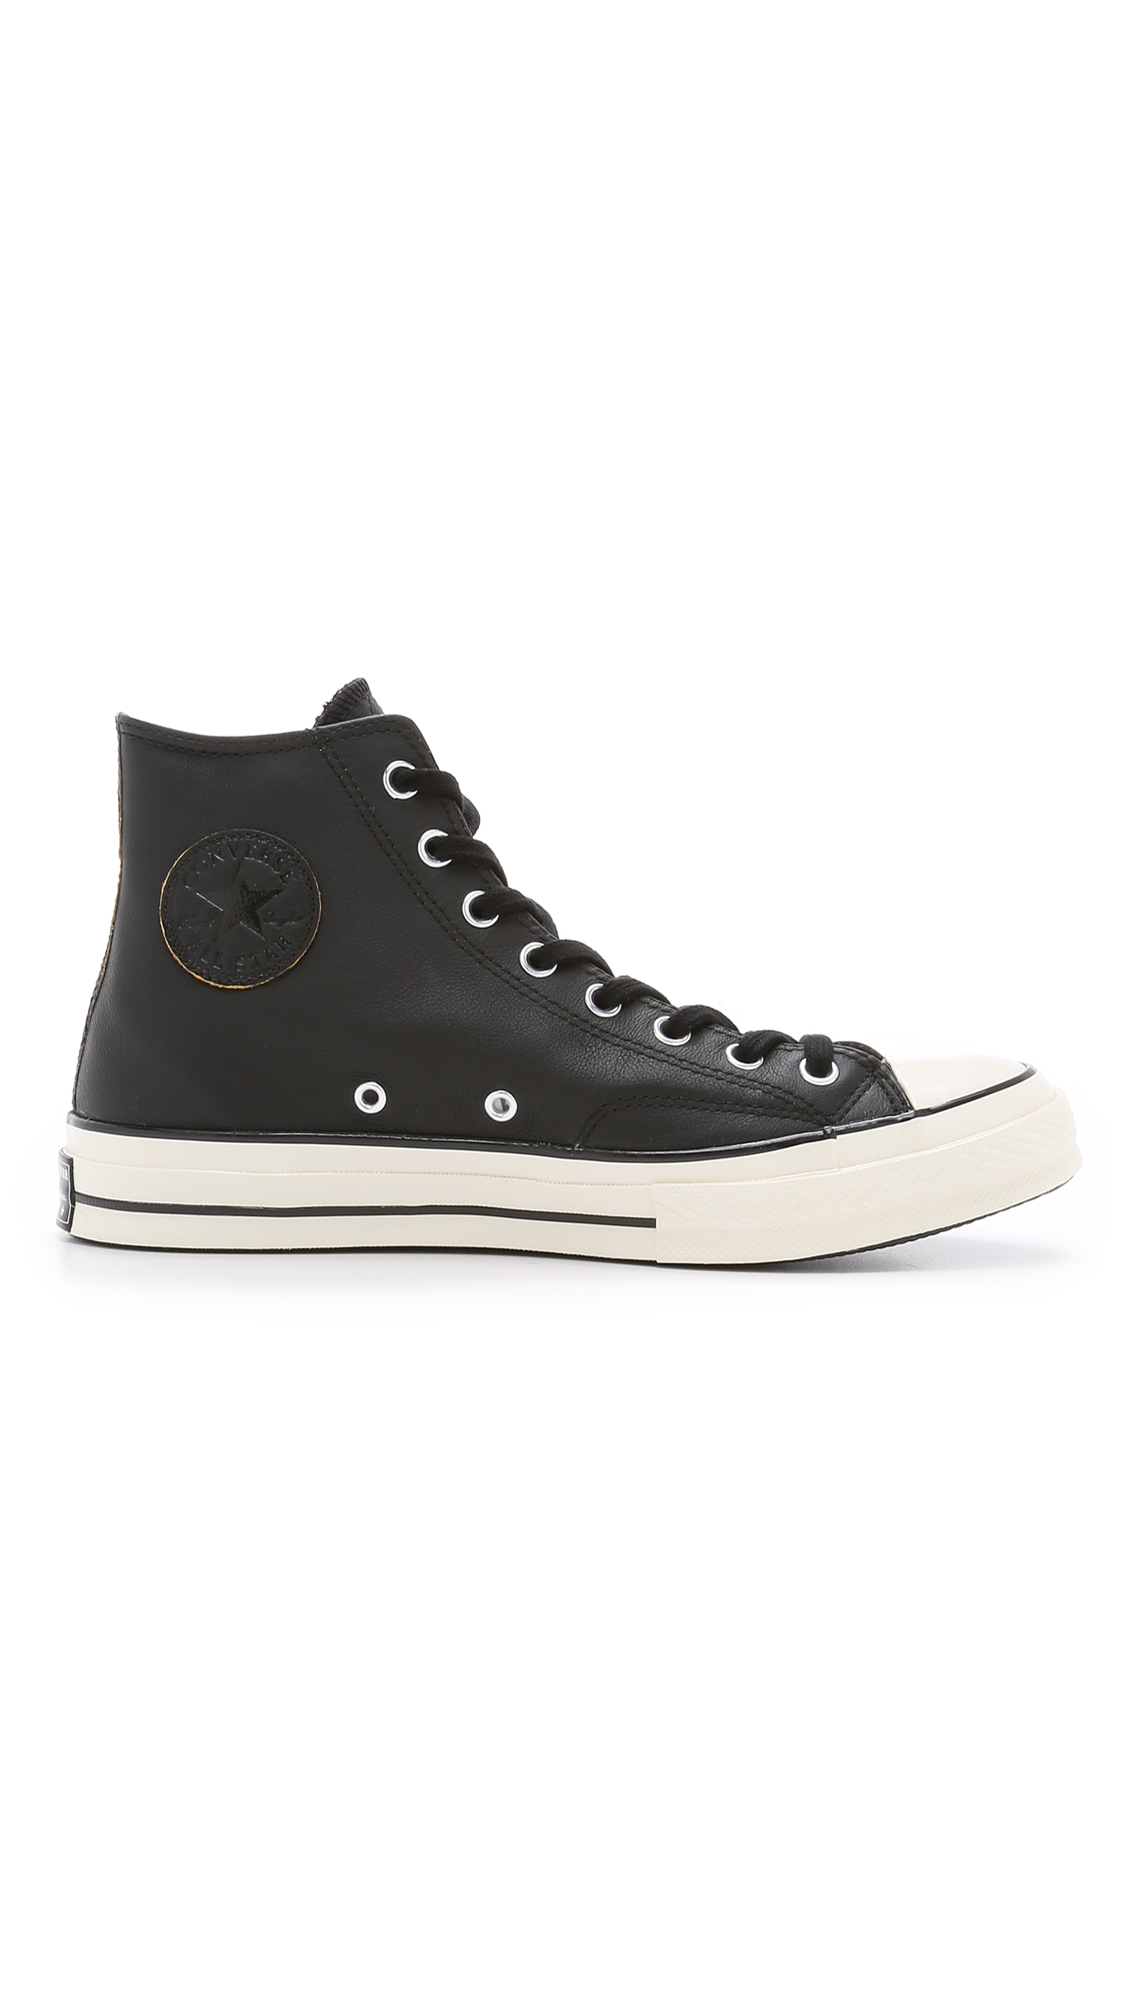 Lyst - Converse Chuck Taylor All Star '70s Leather High Top Sneakers in ...